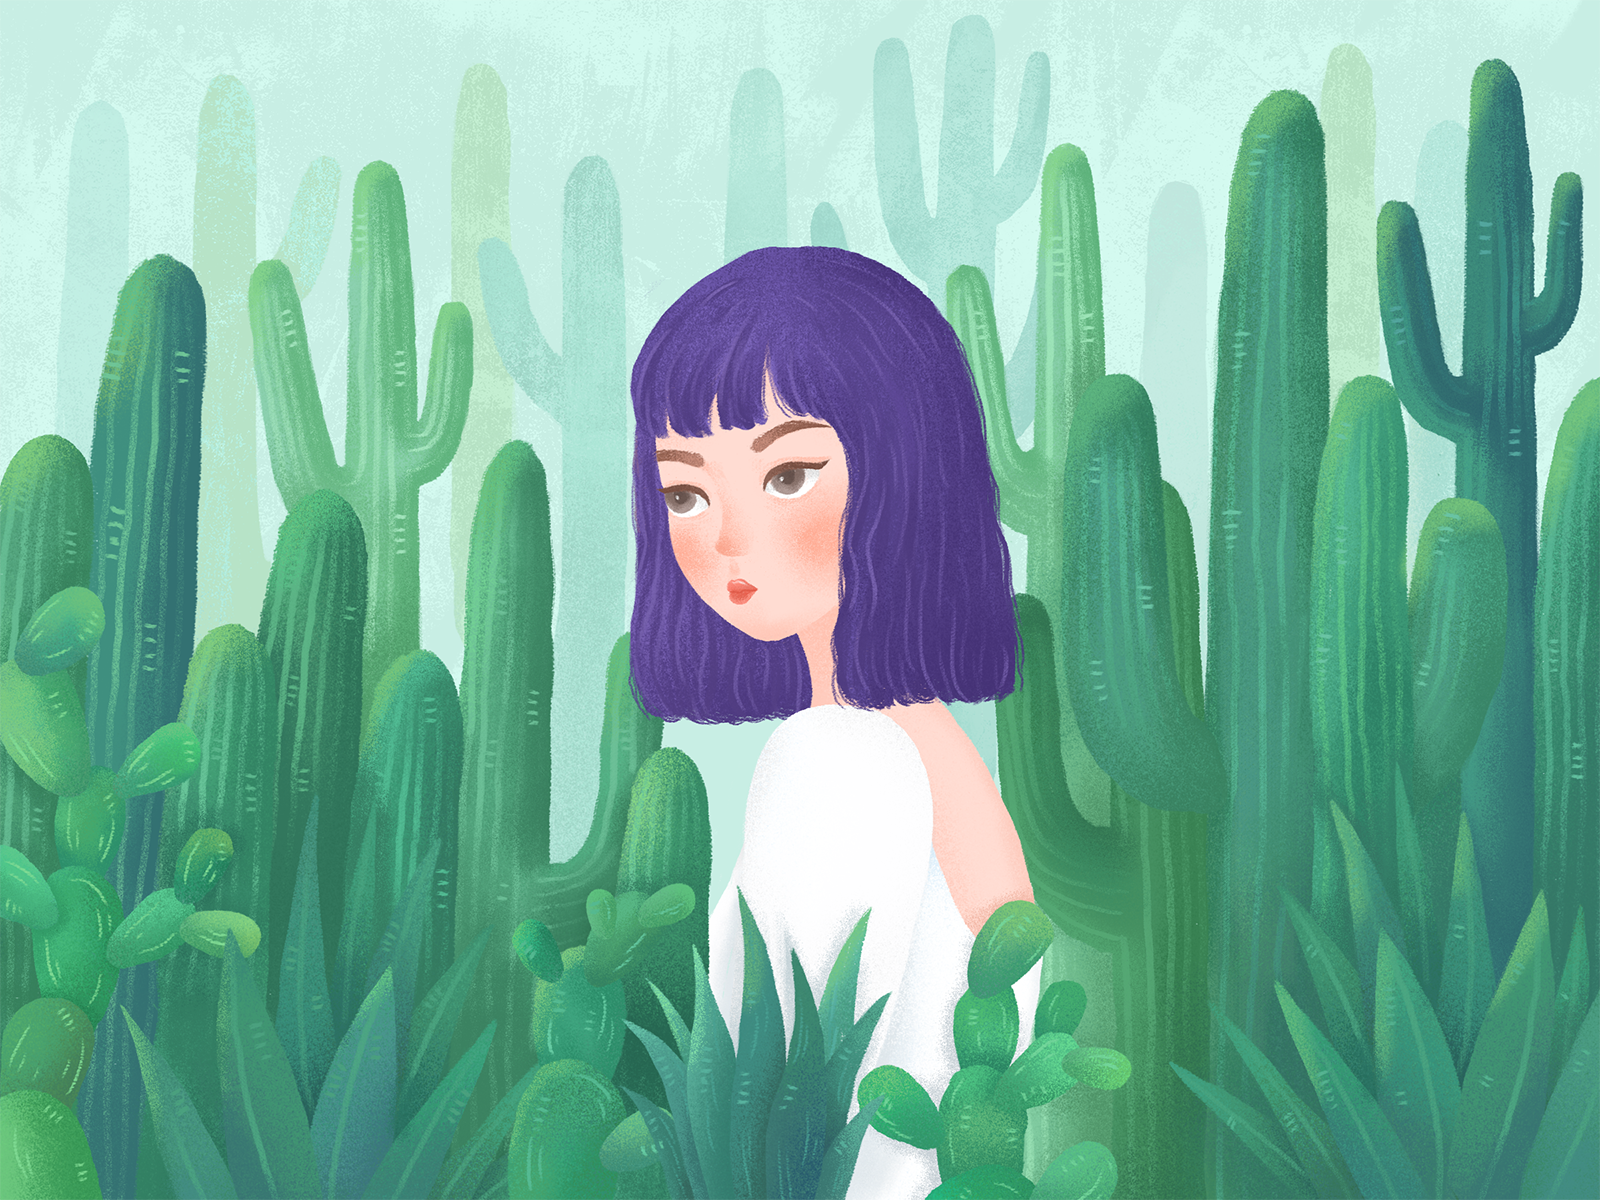 Cactus Girl by Aster 0 on Dribbble